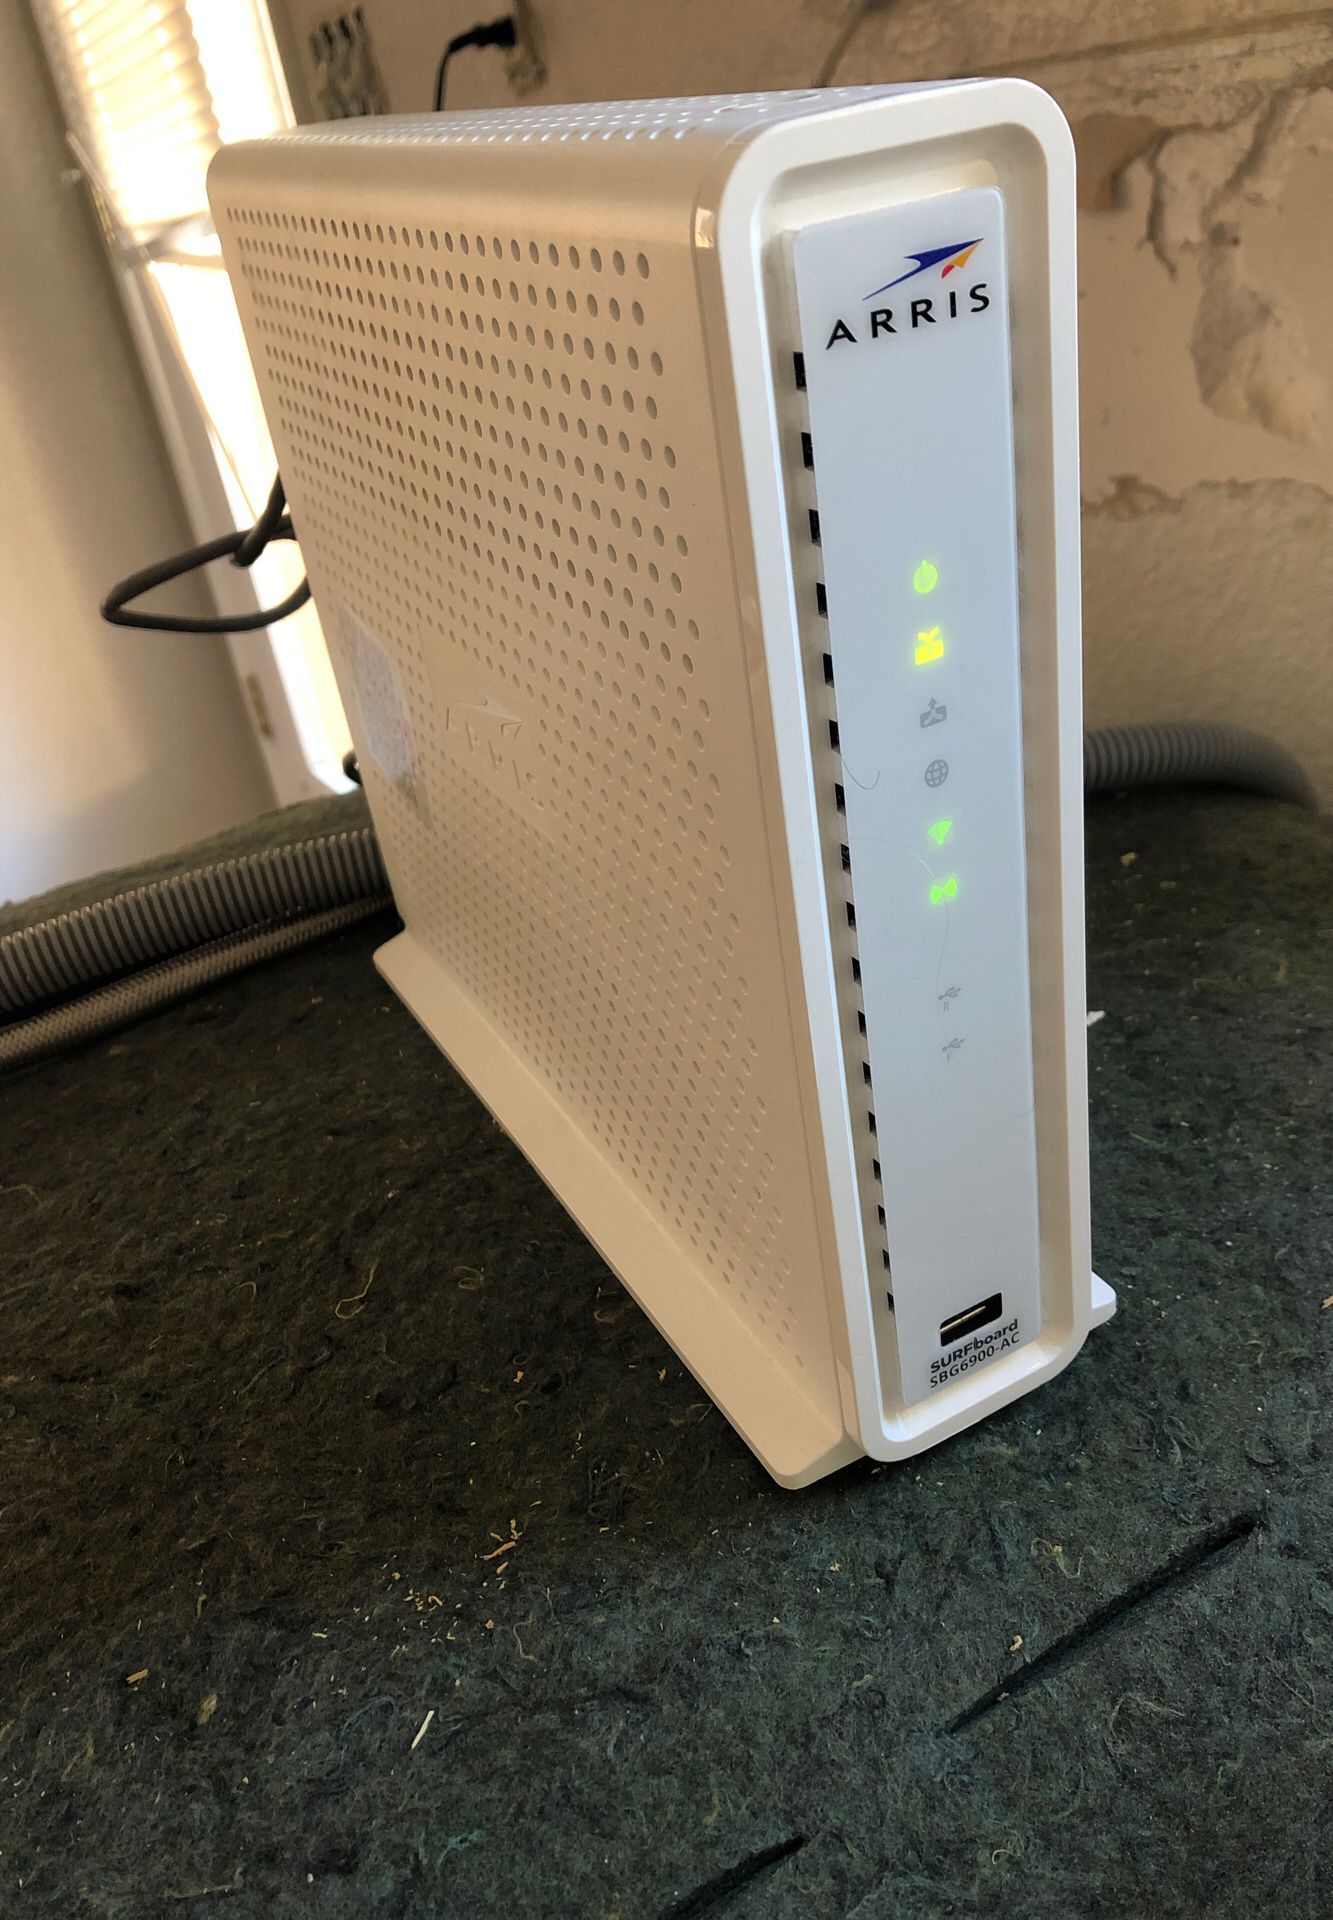 Modem and router for sale!